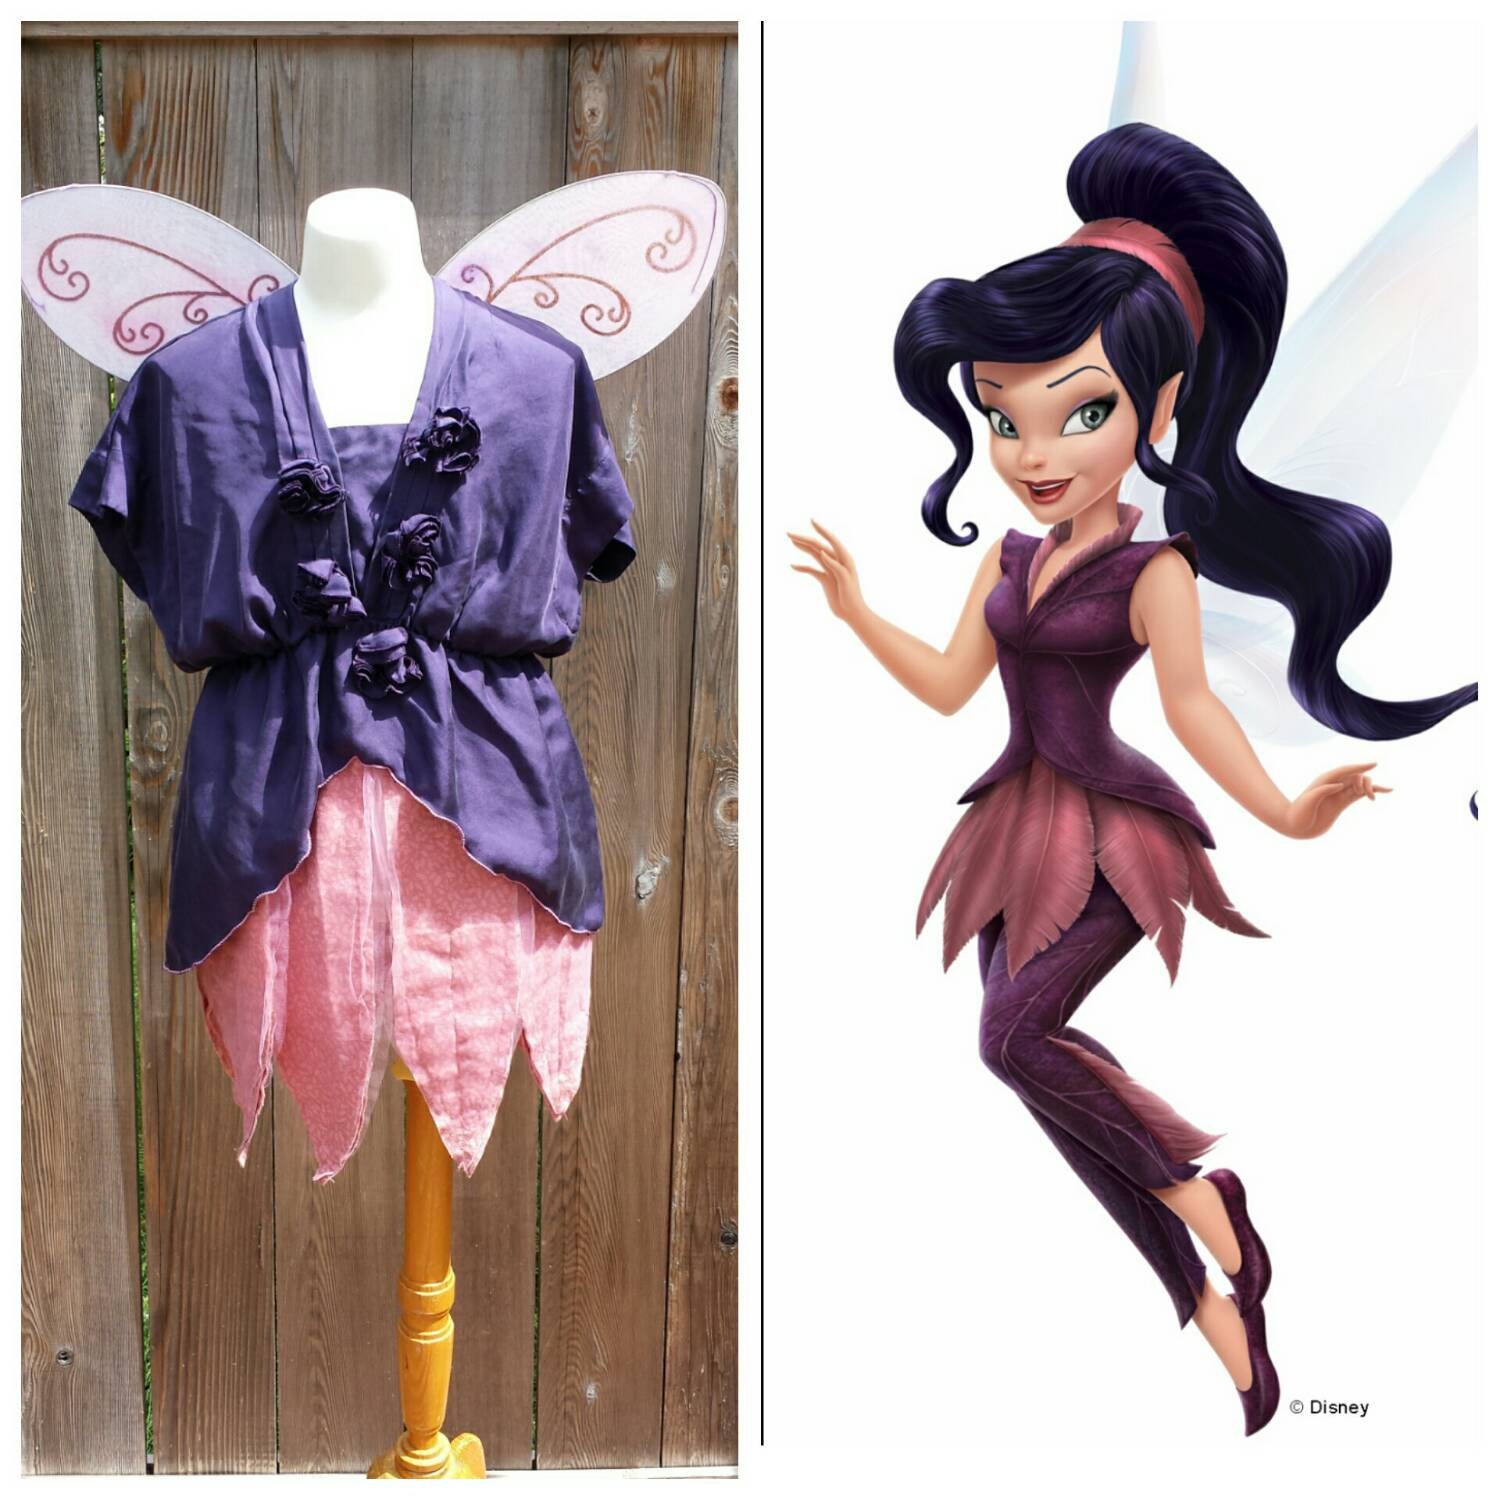 Buy > tinkerbell friends costume > in stock